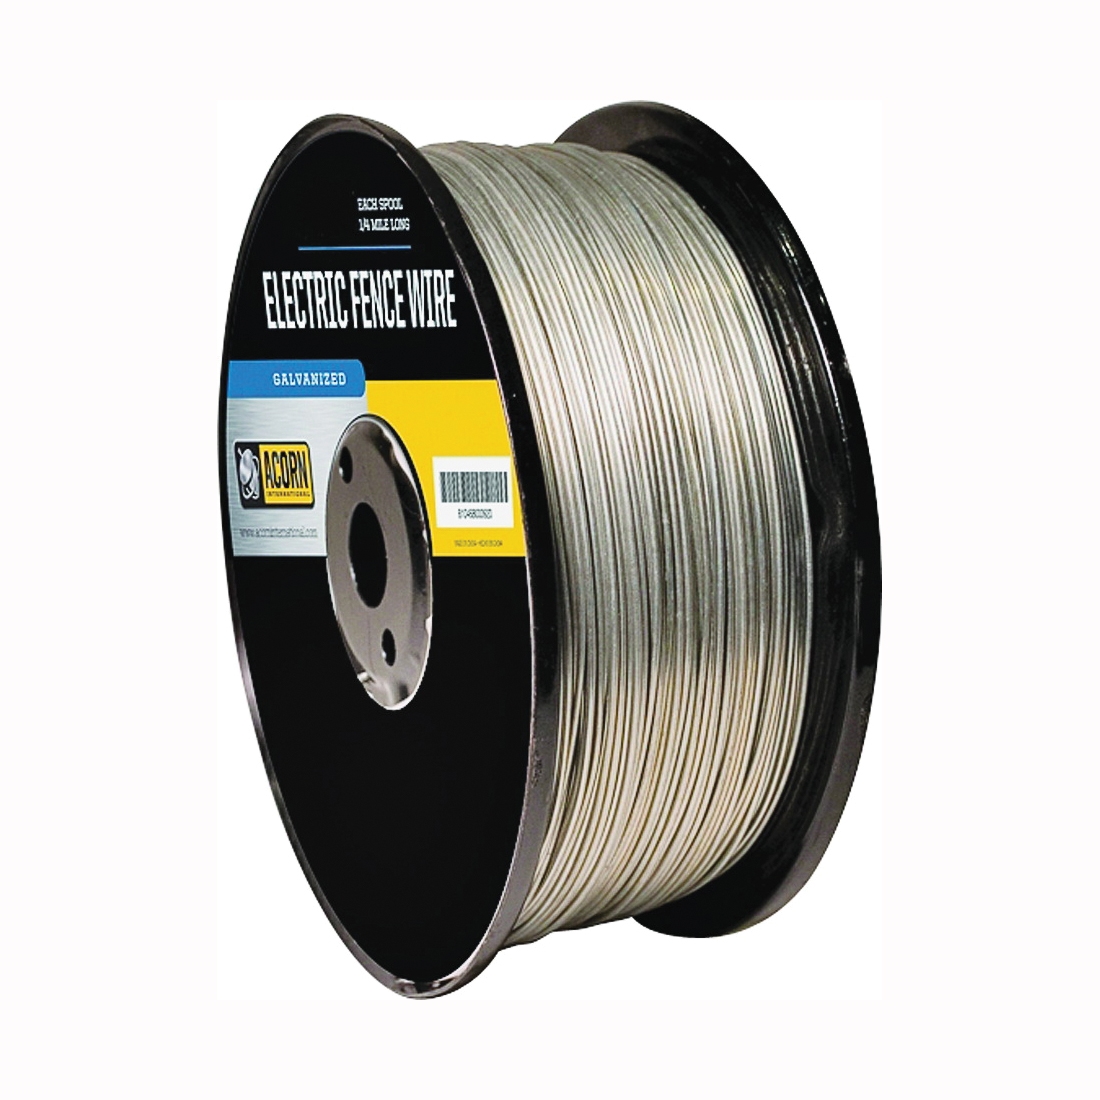 EFW1912 Electric Fence Wire, 19 ga Wire, Metal Conductor, 1/2 mile L